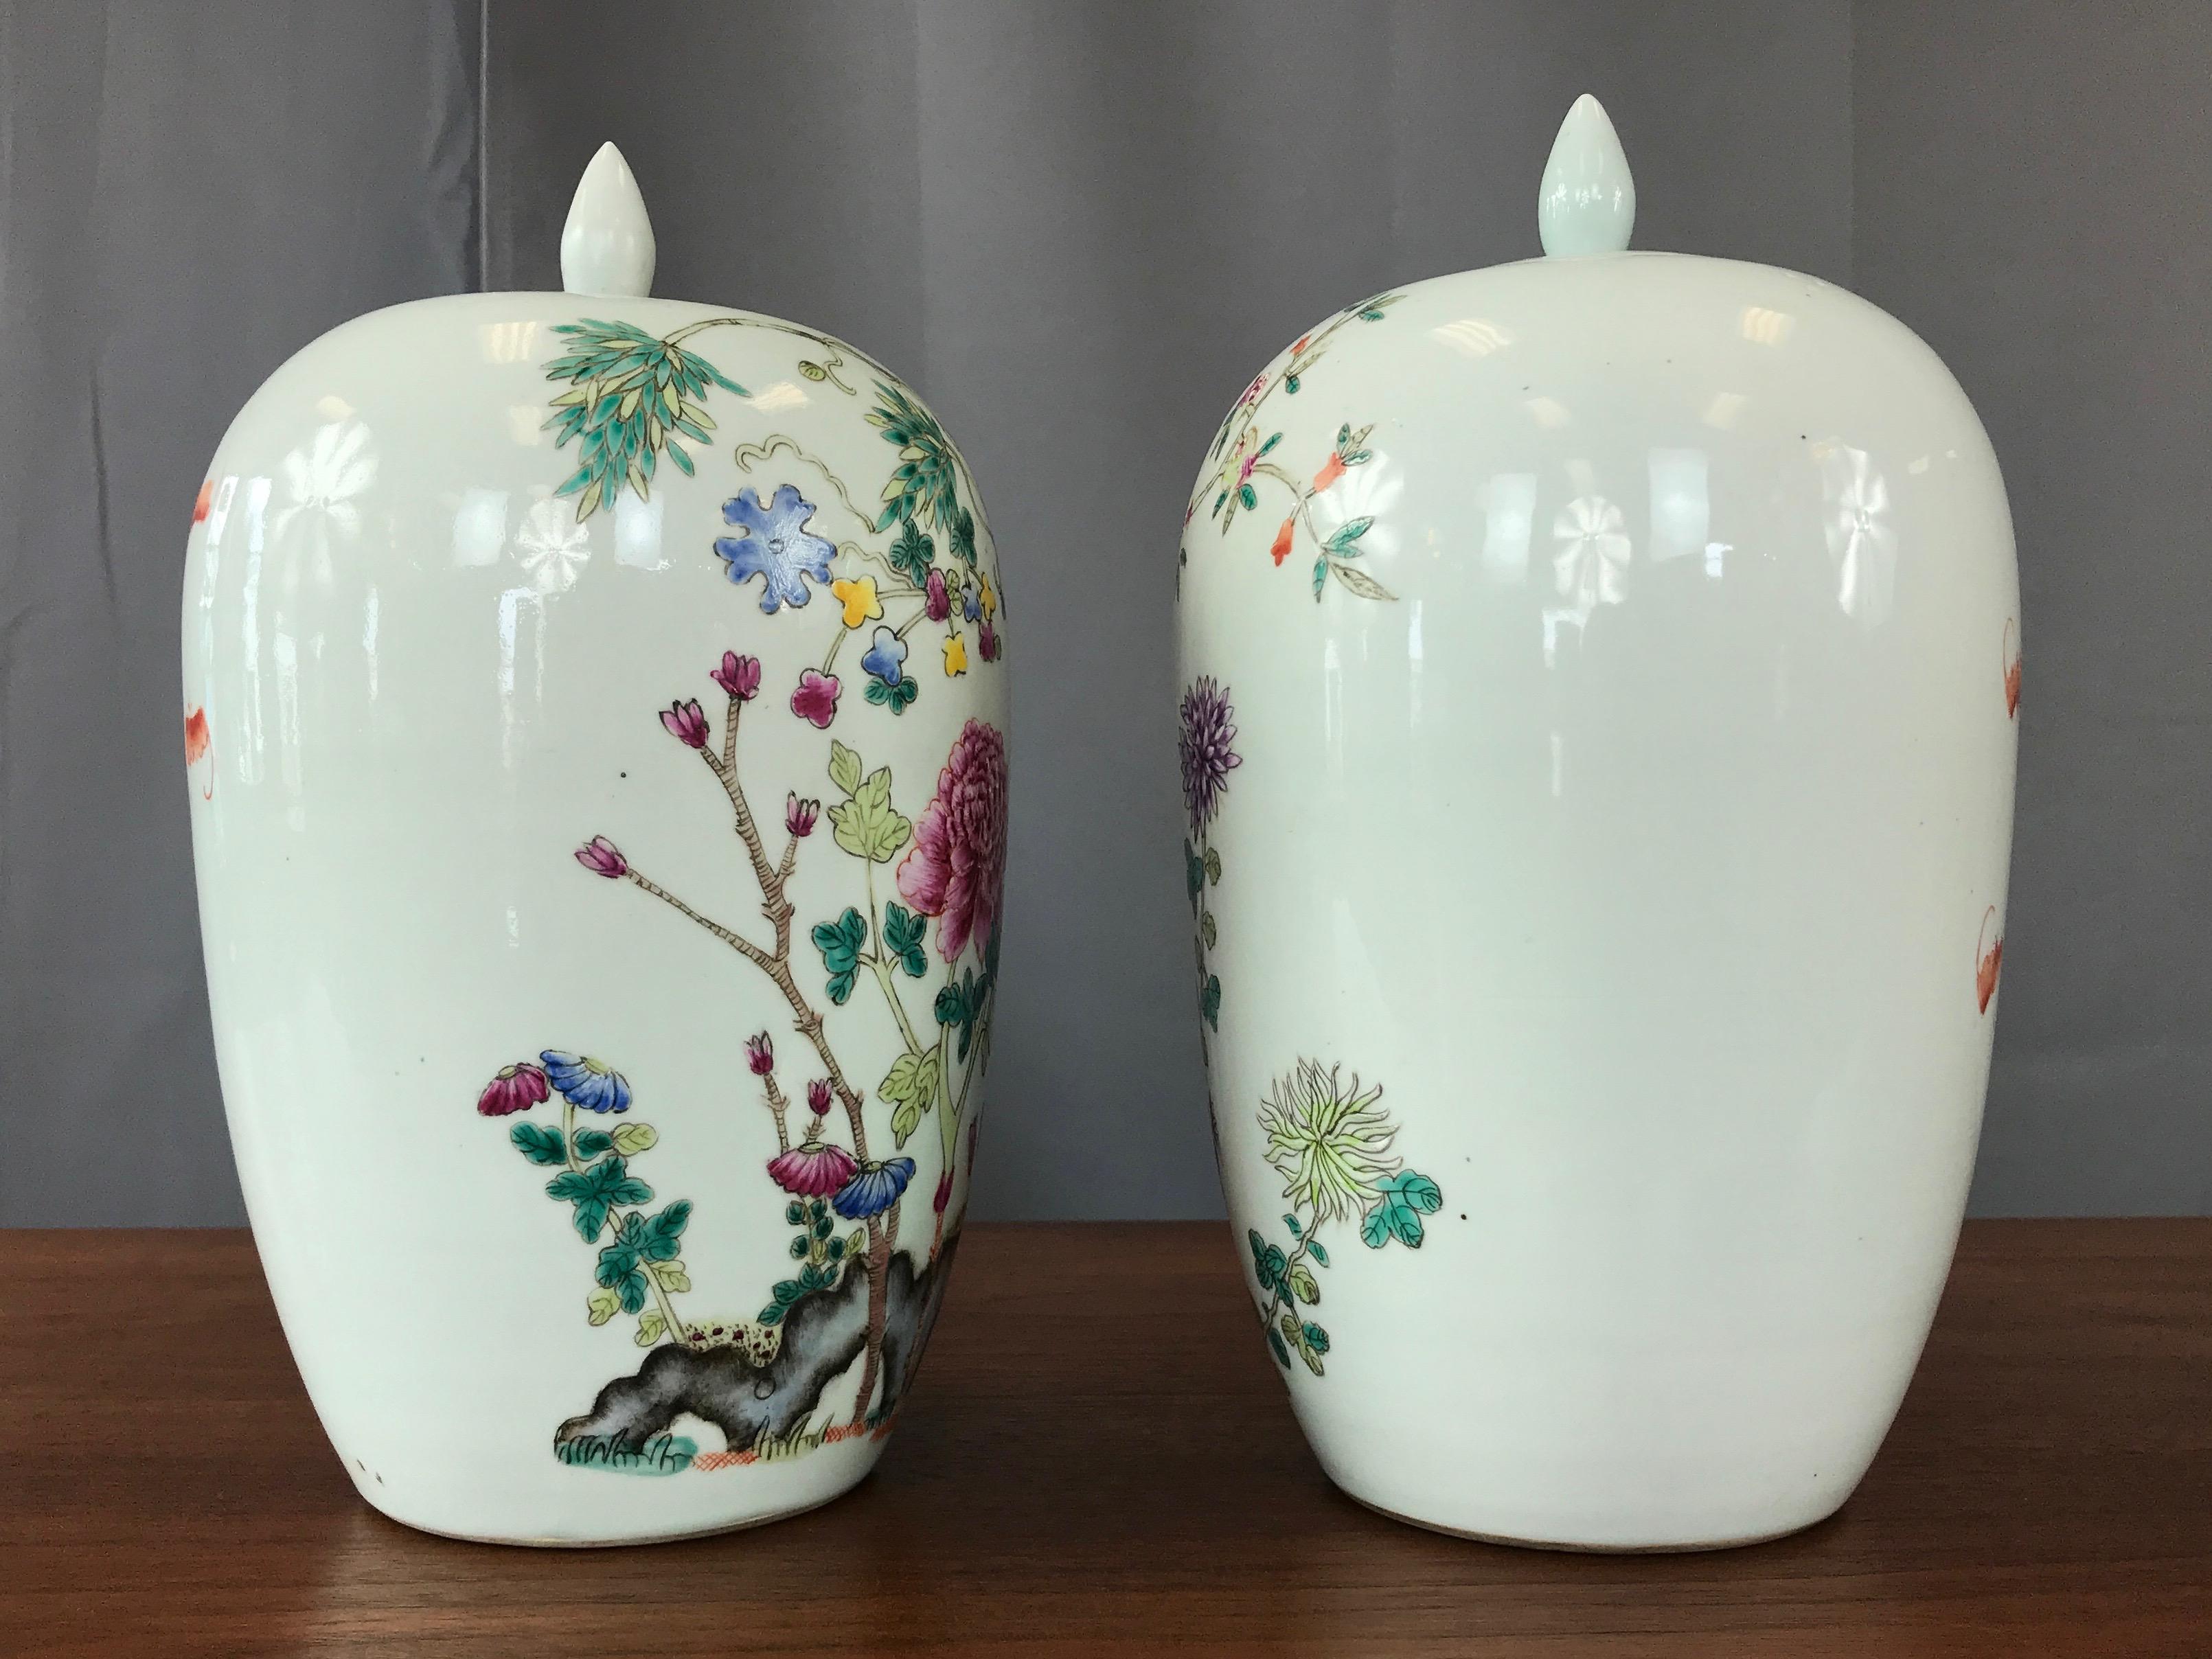 Glazed Pair of Fine Chinese Famille Rose Porcelain Covered Vases, Guangxu Period 